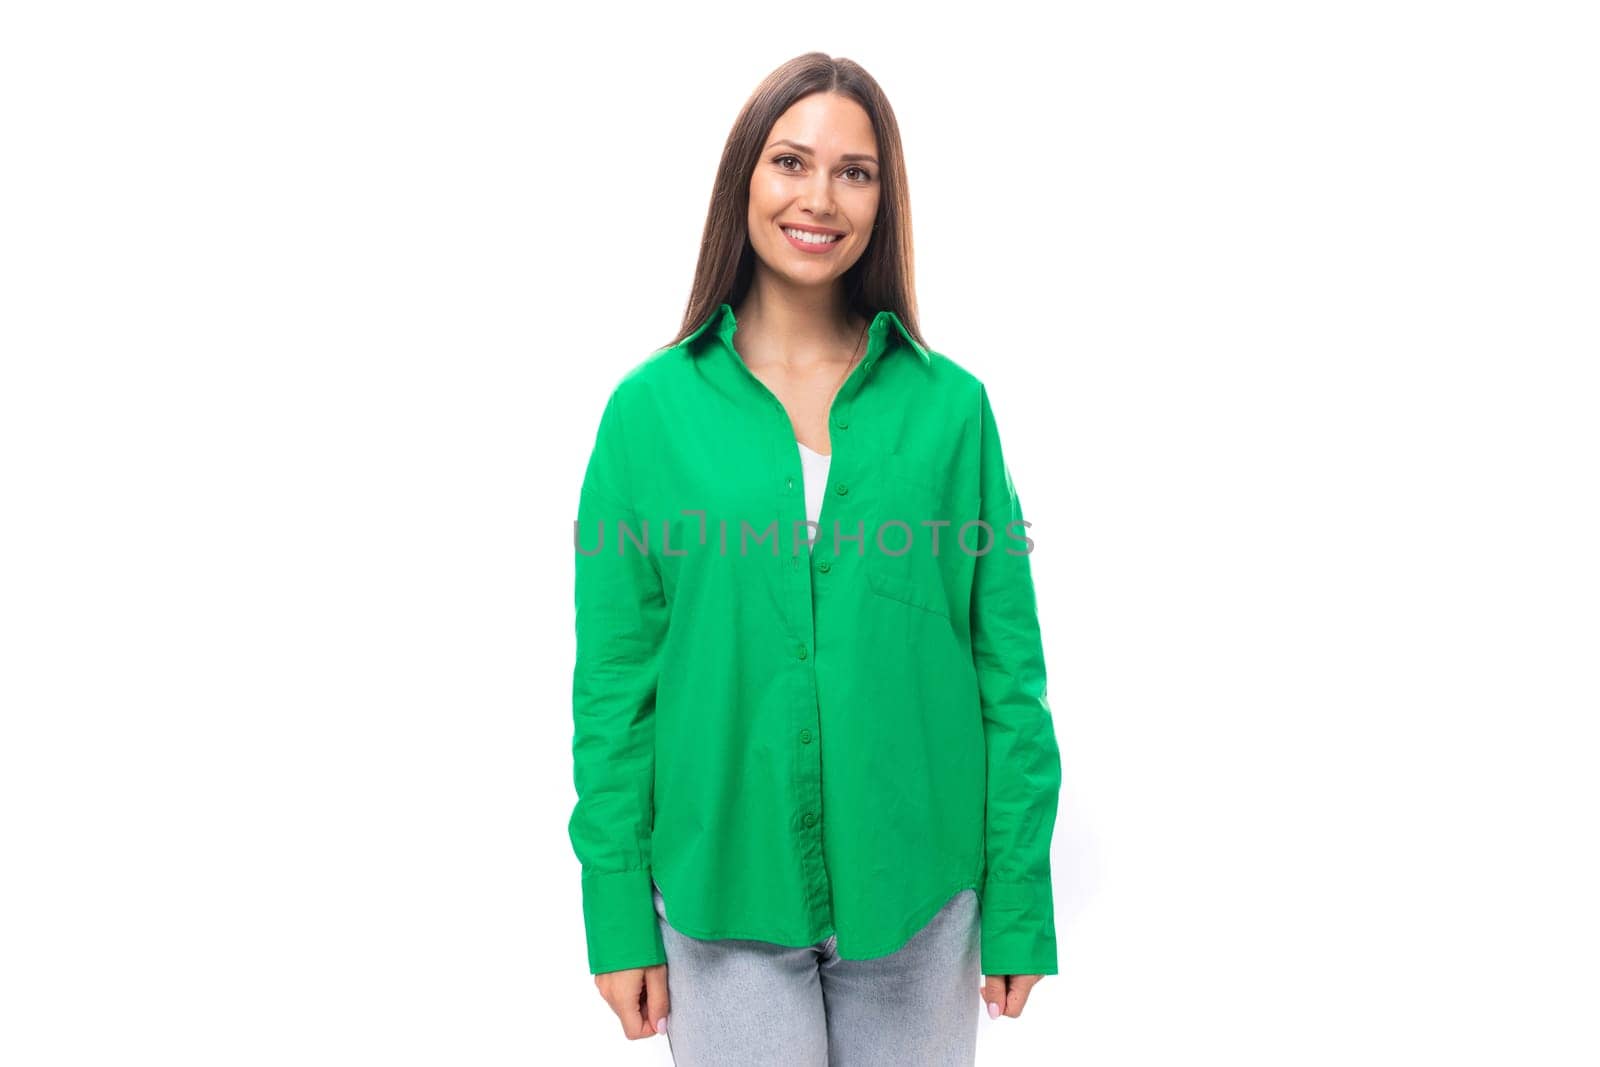 attractive young caucasian brunette lady with makeup dressed in an elegant green shirt on a white background with copy space.